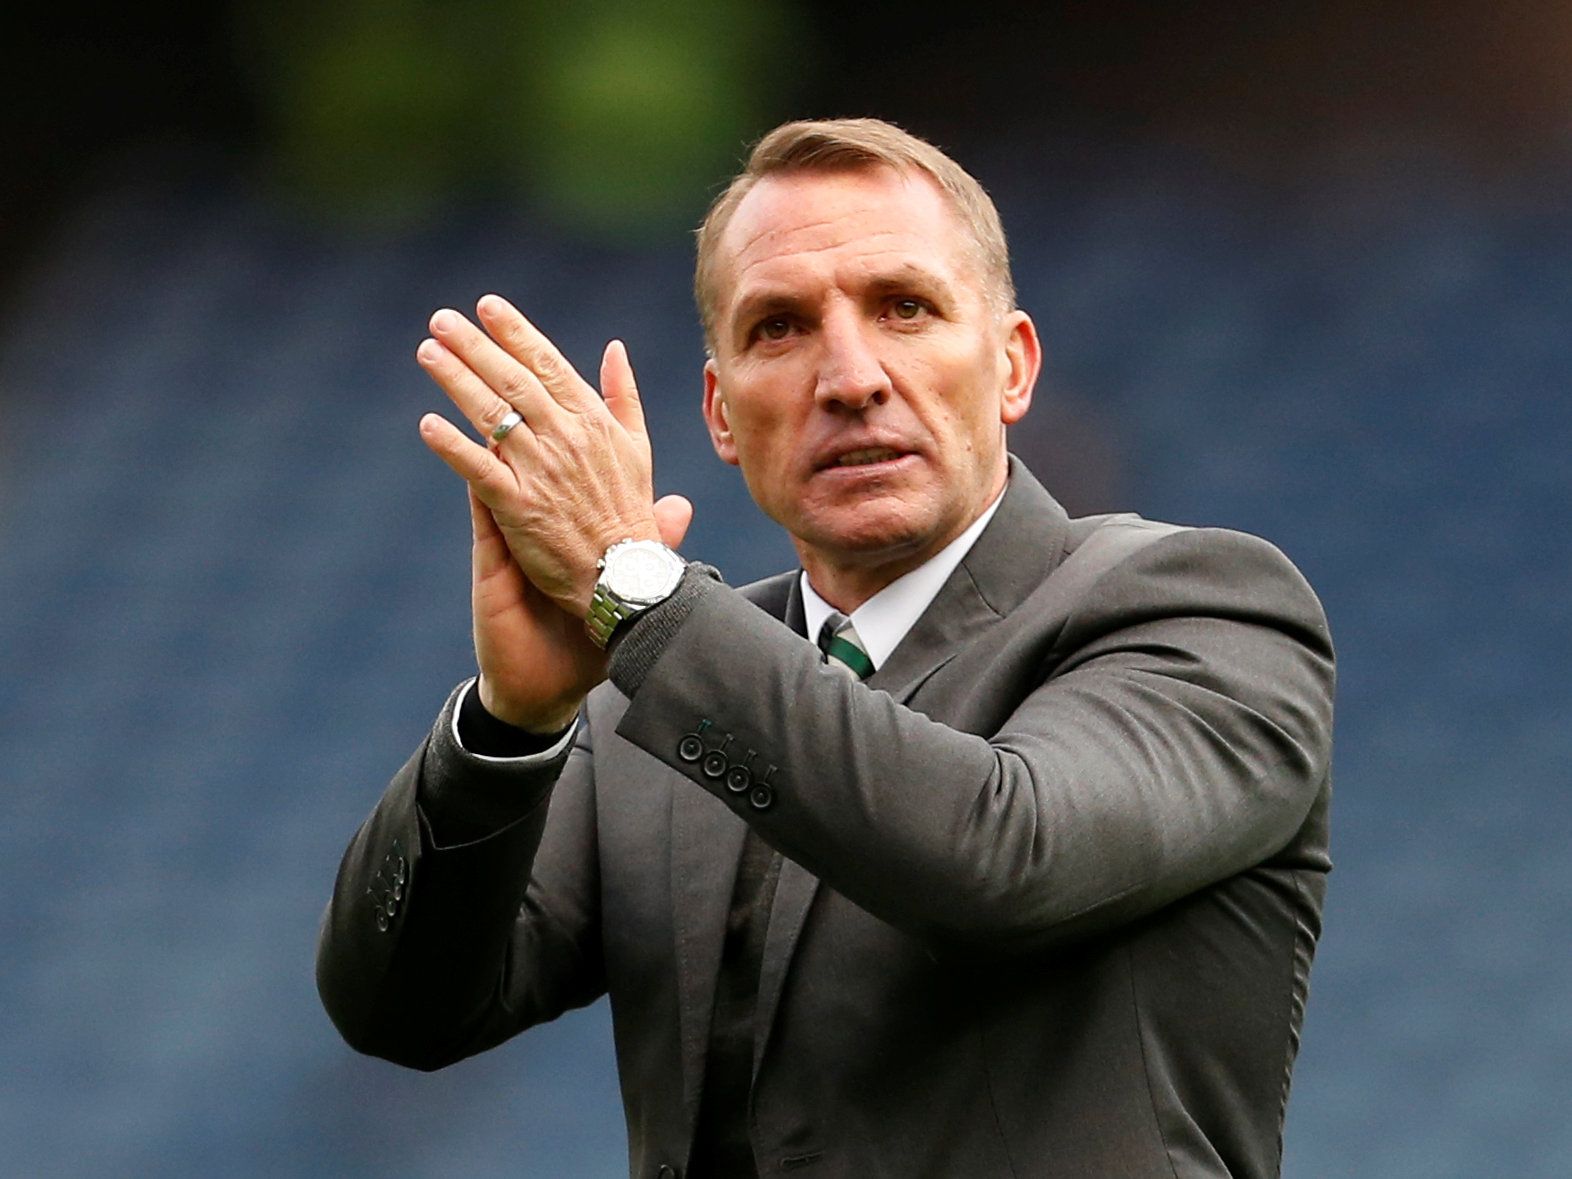 Soccer Football - Scottish League Cup Semi Final - Heart of Midlothian v Celtic - Murrayfield Stadium, Edinburgh, Britain - October 28, 2018  Celtic manager Brendan Rodgers applauds fans after the match    Action Images via Reuters/Craig Brough  EDITORIAL USE ONLY. No use with unauthorized audio, video, data, fixture lists, club/league logos or 